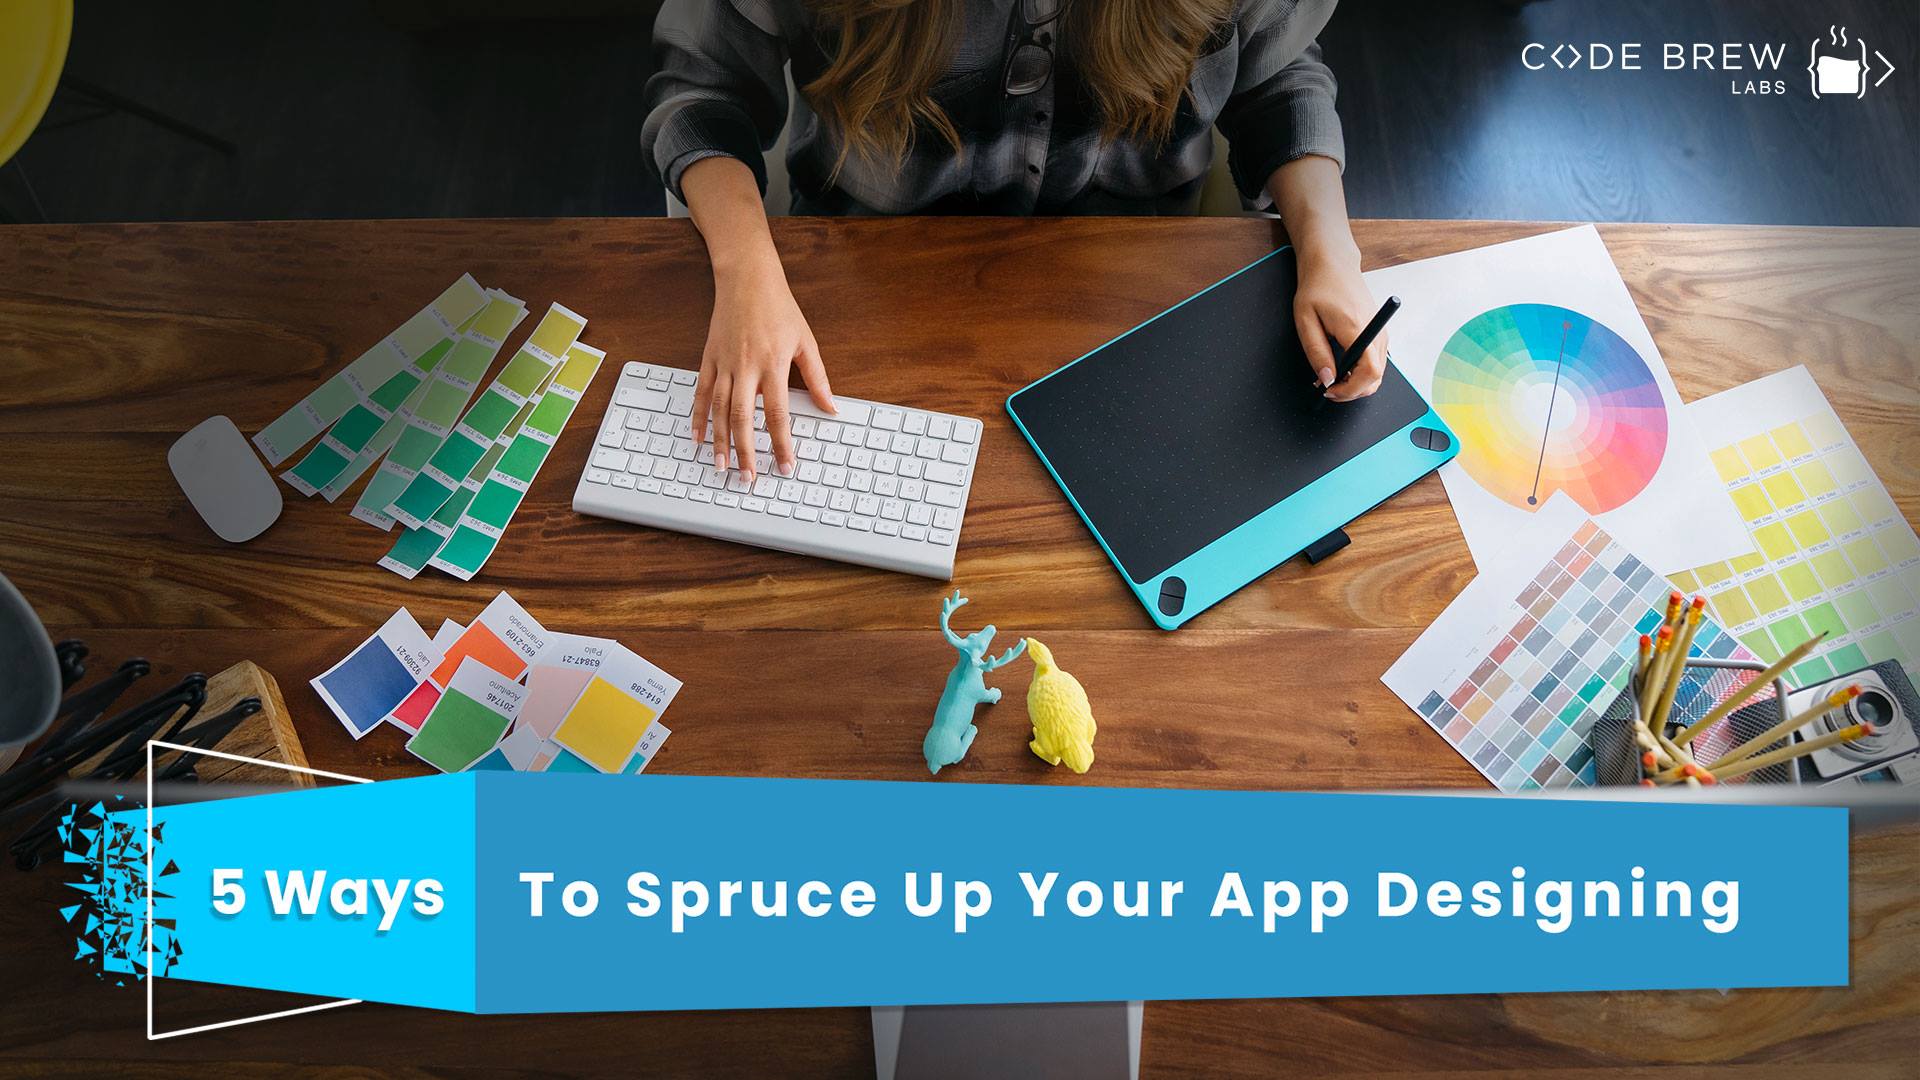 5 Ways To Spruce Up Your App Designing